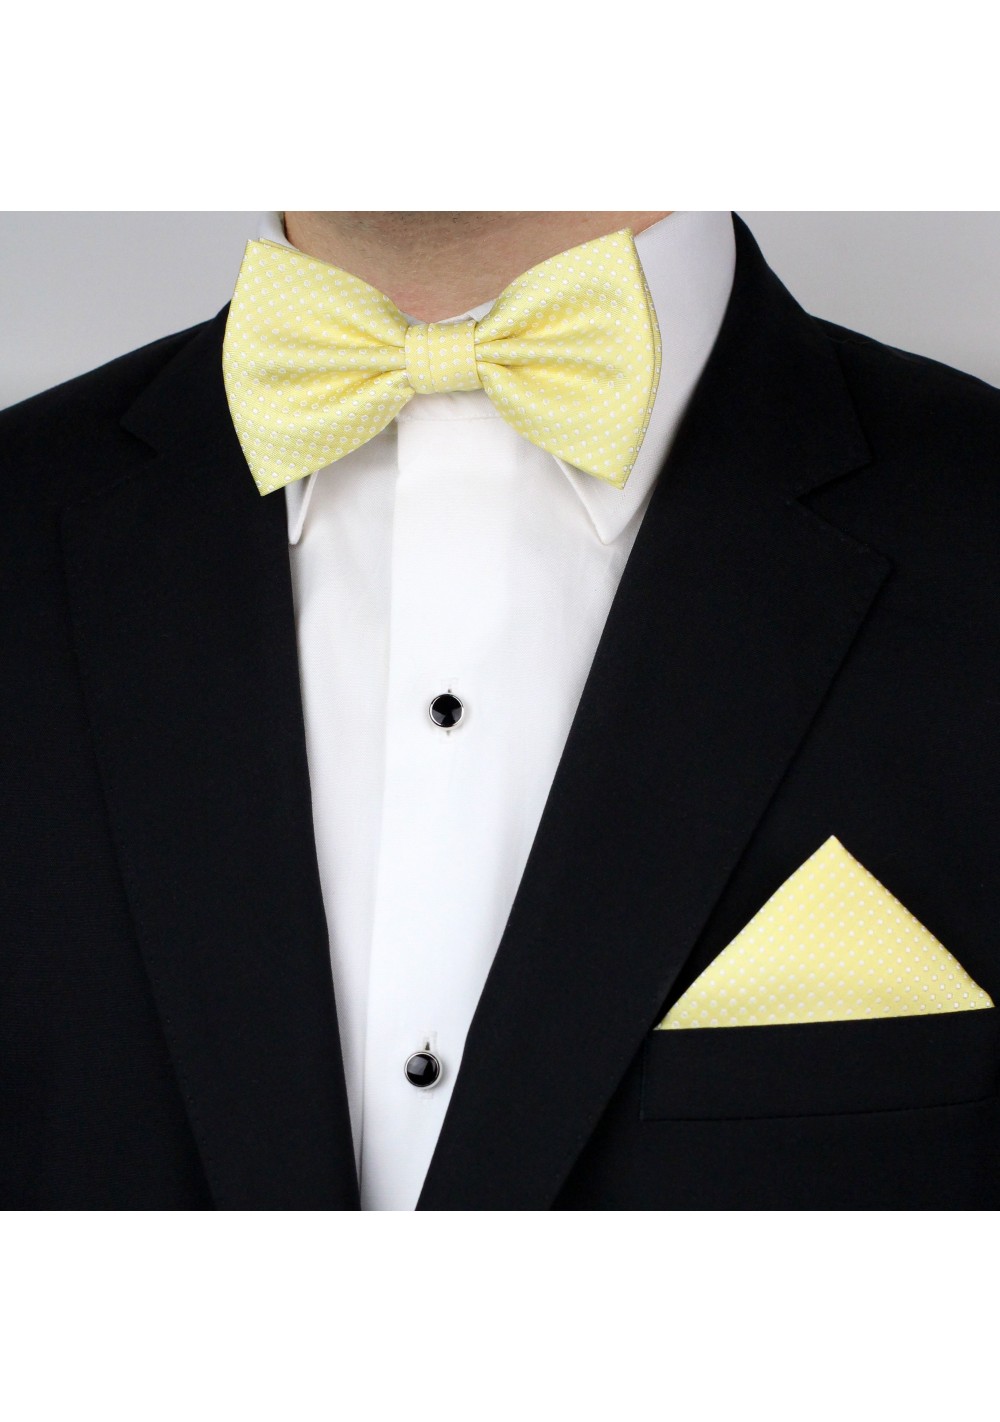 Soft Yellow Bow Tie Set | Pin Dot Bow Tie and Matching Pocket Square in ...